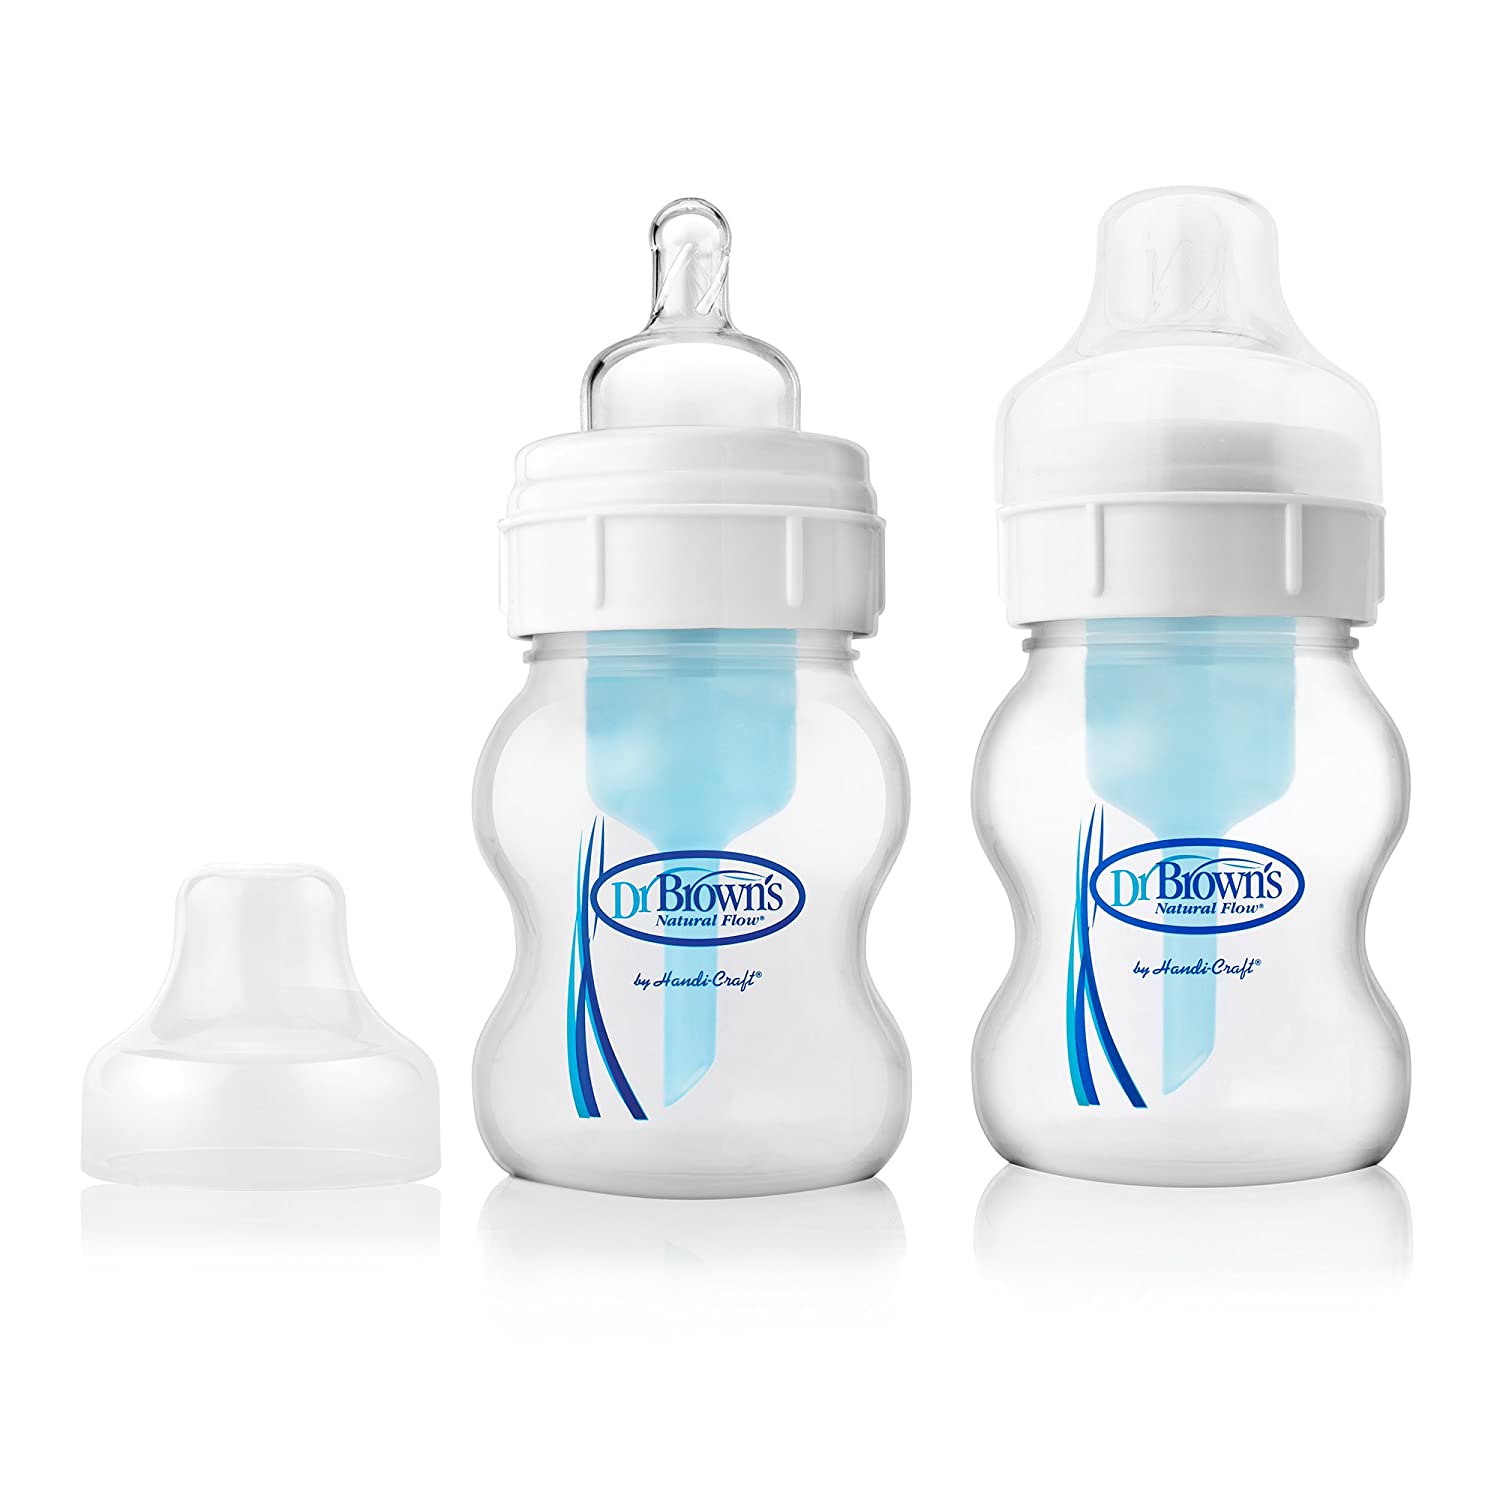 Top 4 Best Natural Baby Bottles Reviews in 2022 4